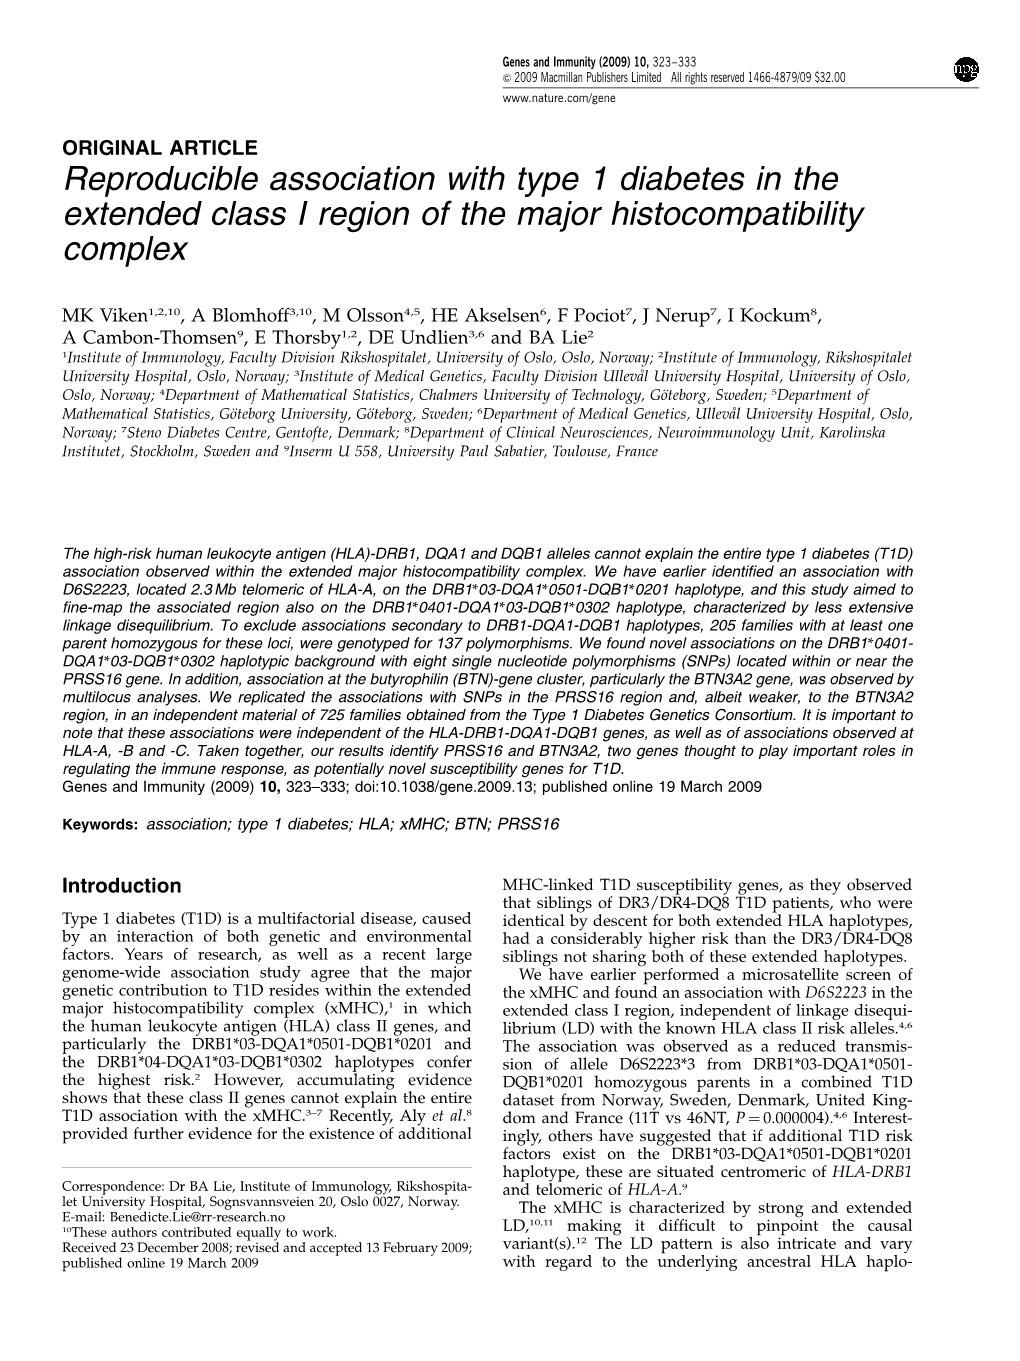 Reproducible Association with Type 1 Diabetes in the Extended Class I Region of the Major Histocompatibility Complex